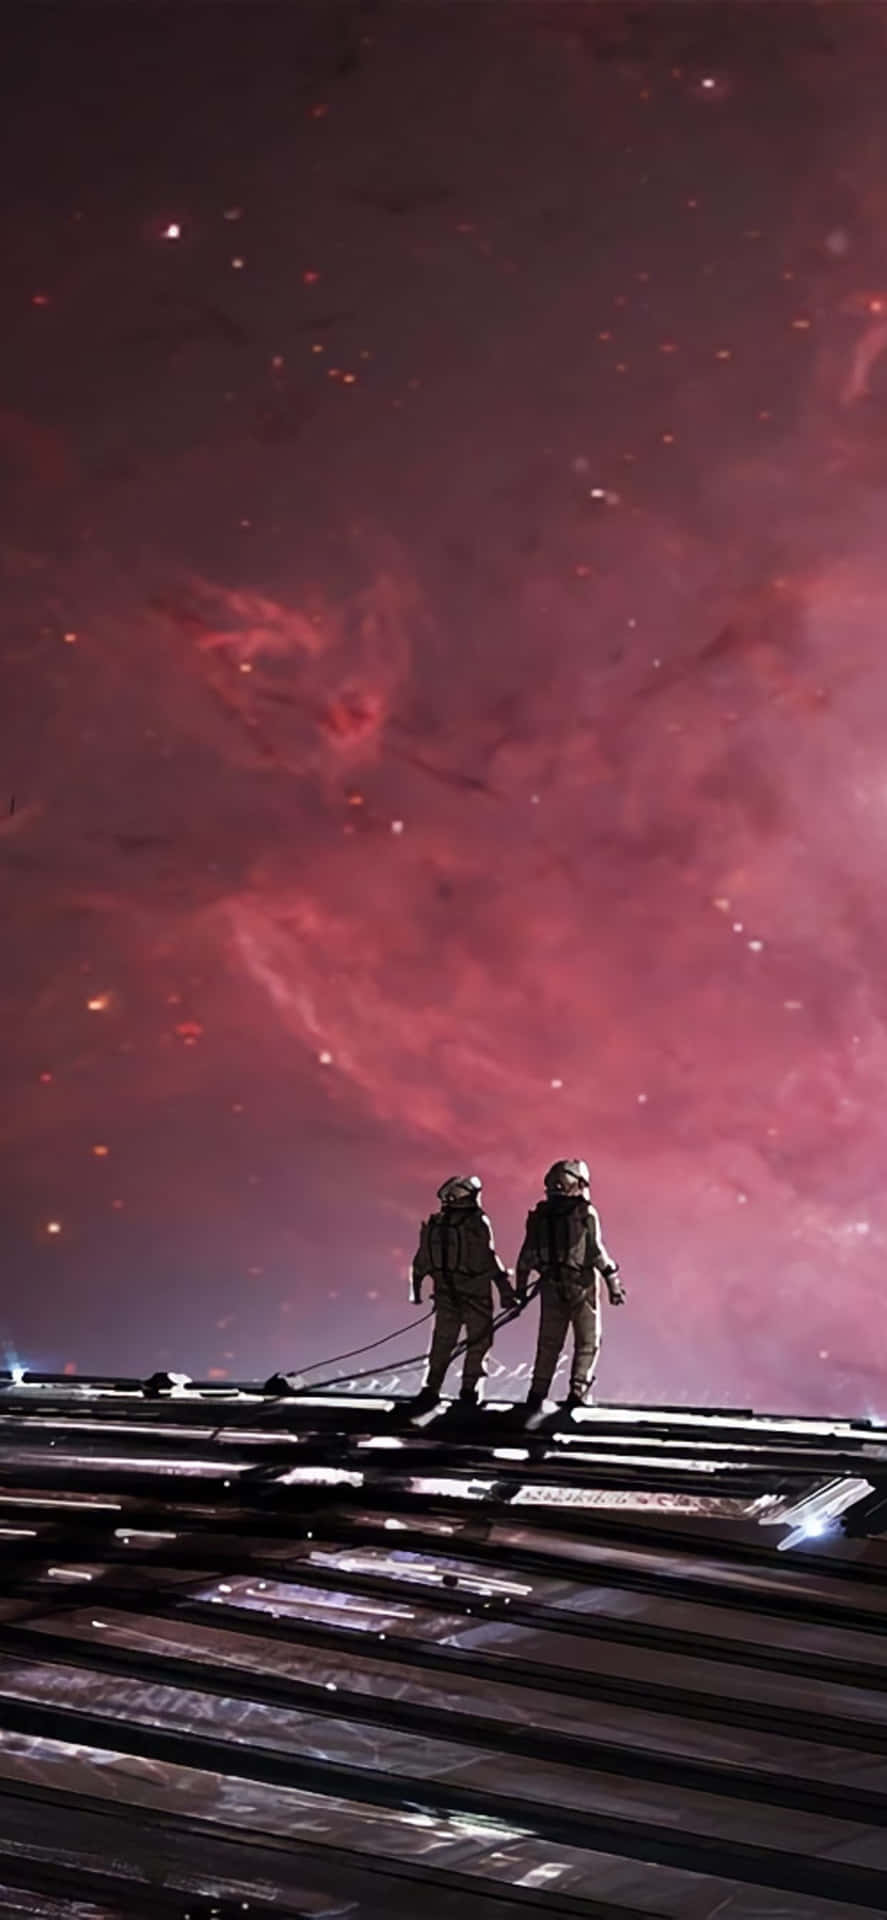 Two Astronauts Walking On A Train Track With A Pink Sky Wallpaper